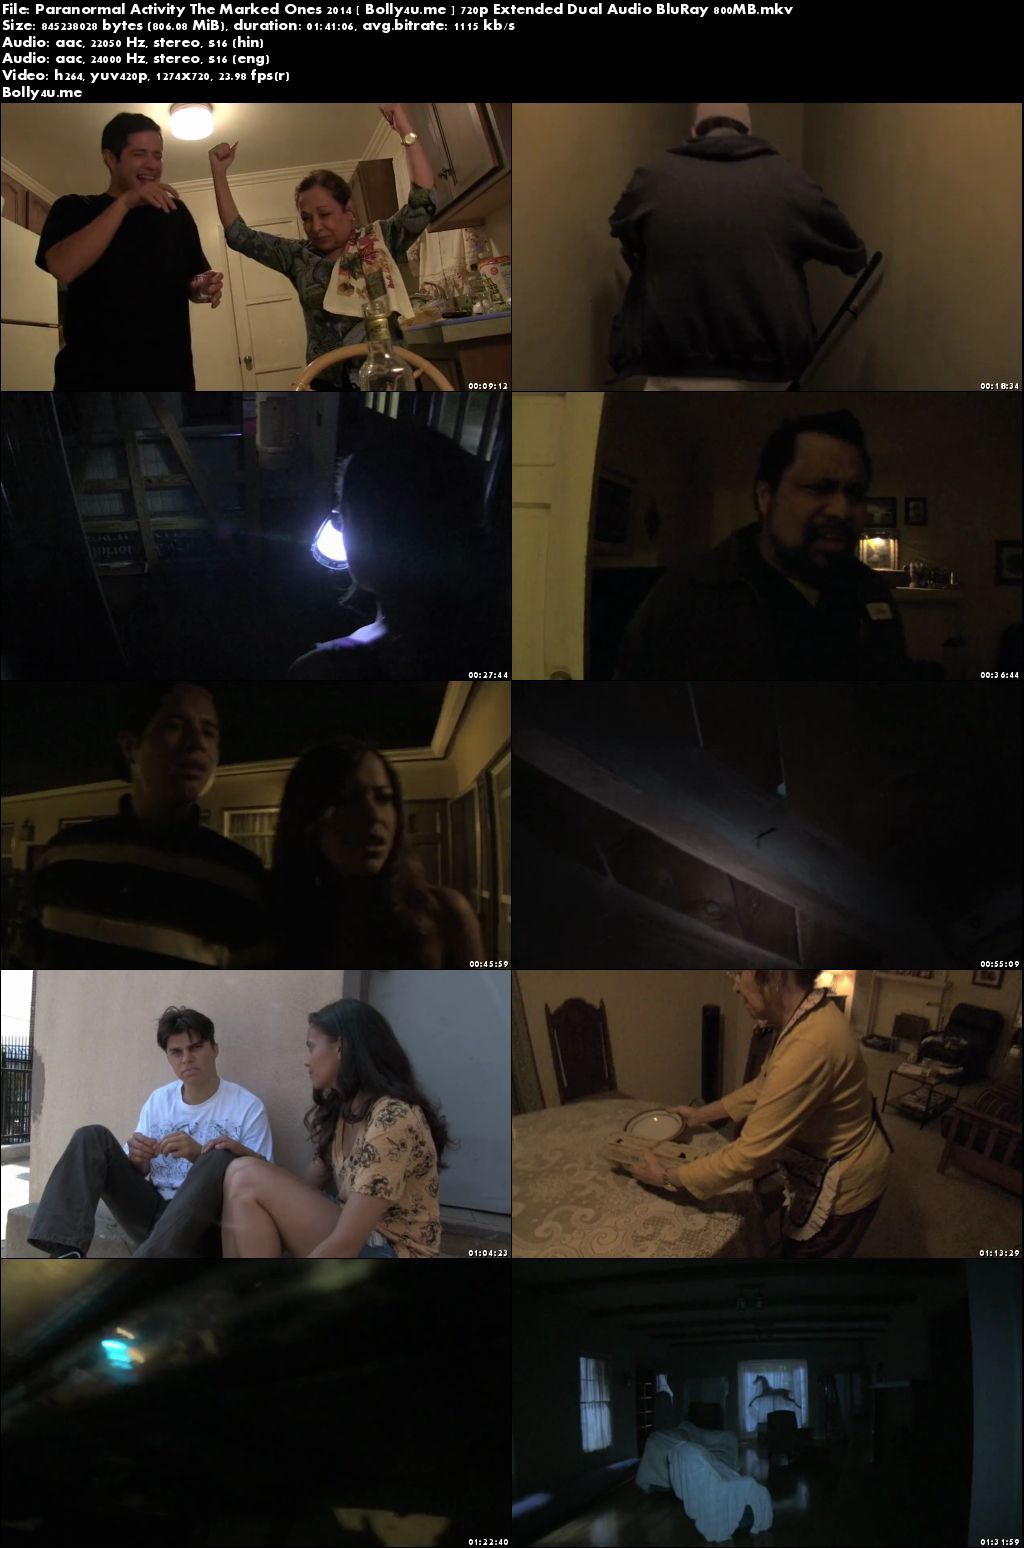 Paranormal Activity The Marked Ones 2014 BRRip 350MB Hindi Dual Audio 480p Download